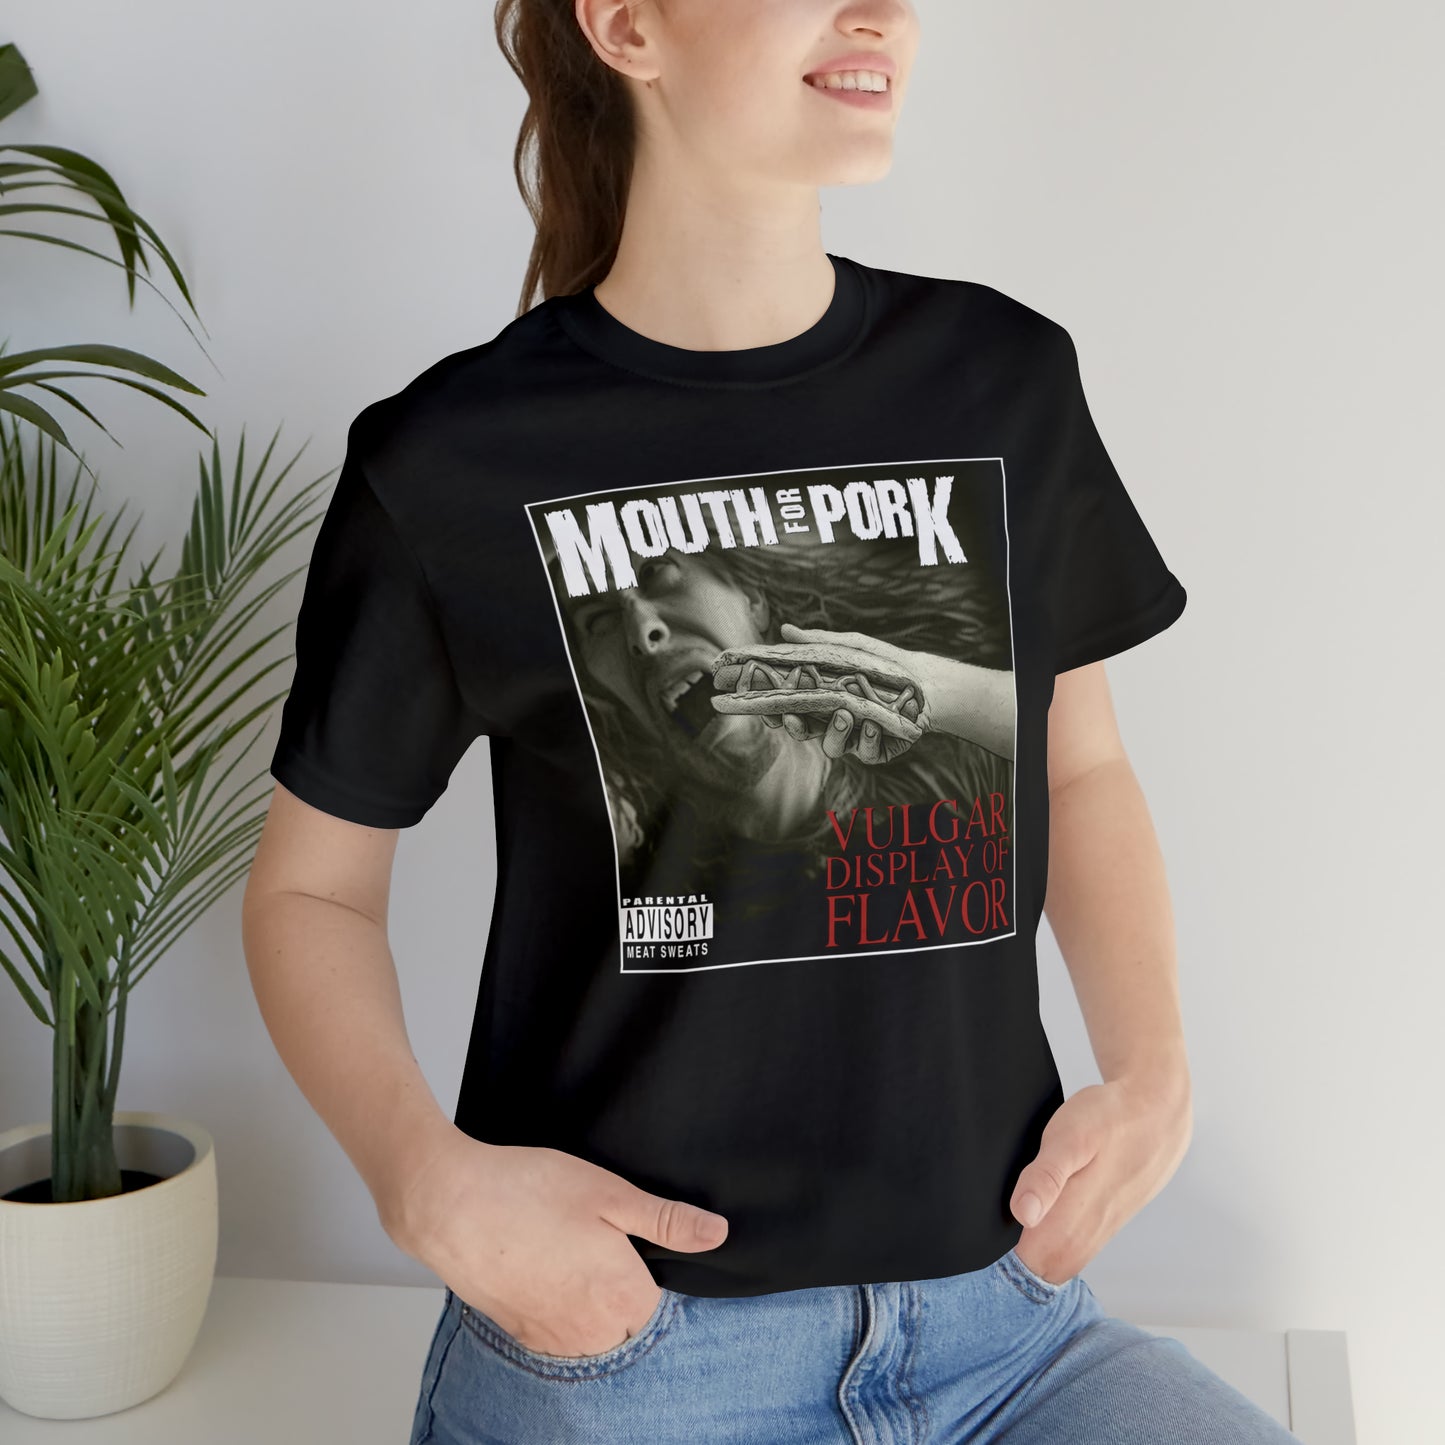 Mouth for Pork Tee